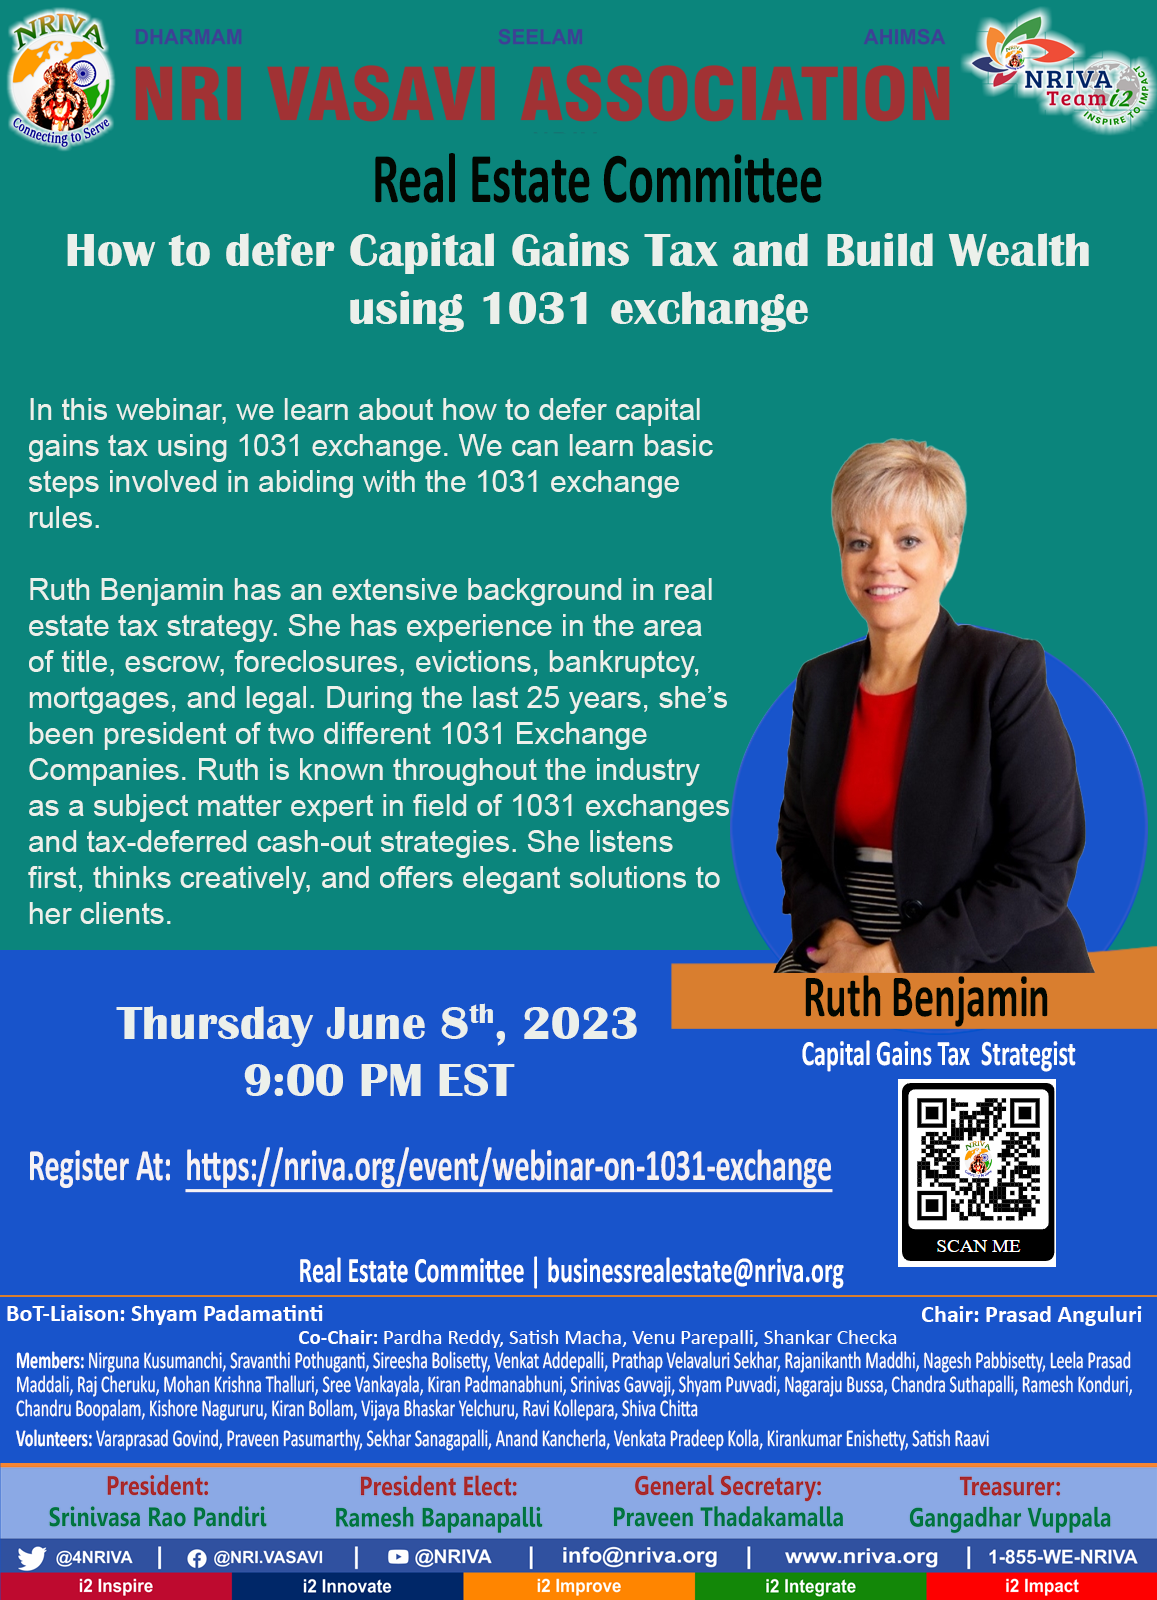 How to defer Real Estate Capital Gains Tax and Build Wealth using 1031 Exchange organized by NRIVA i2 Real Estate Committee